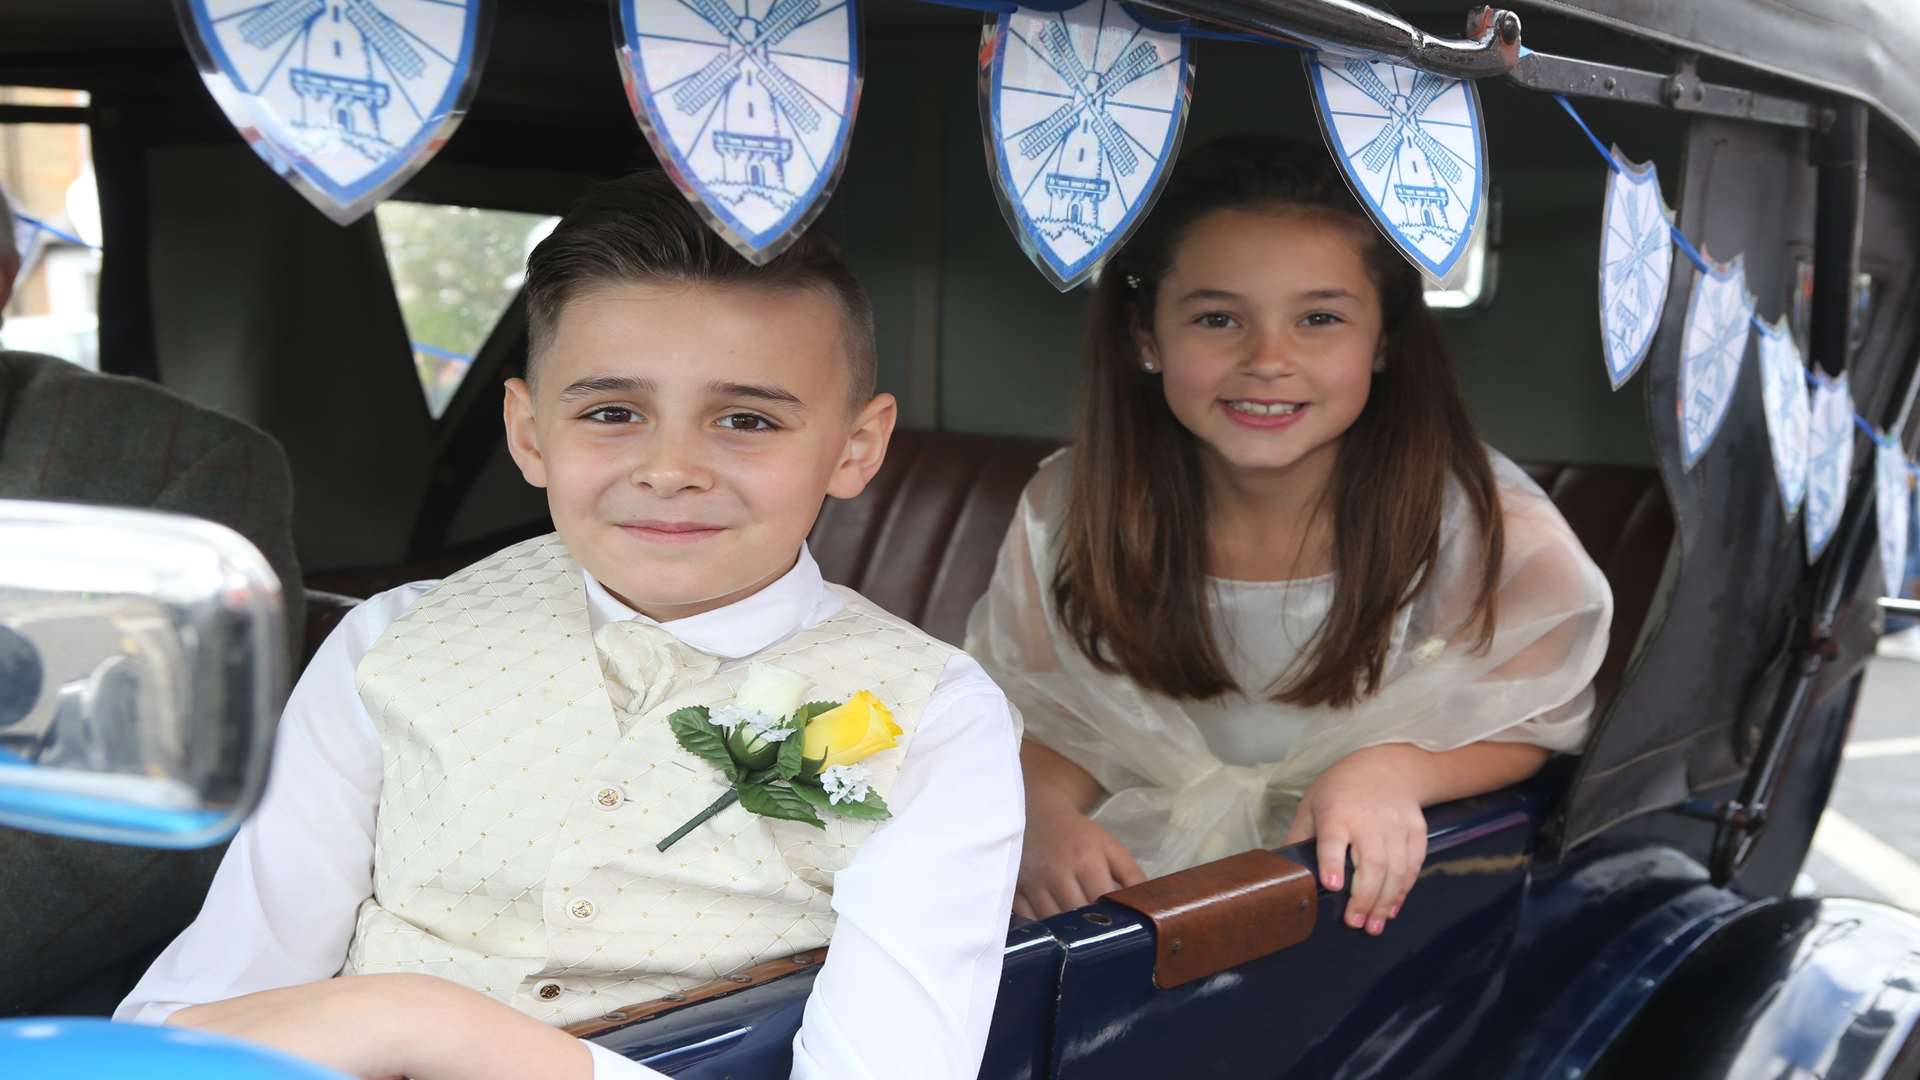 Vincent, 10, and Emily, 11, were the Meopham May King and Queen. Picture: John Westhrop